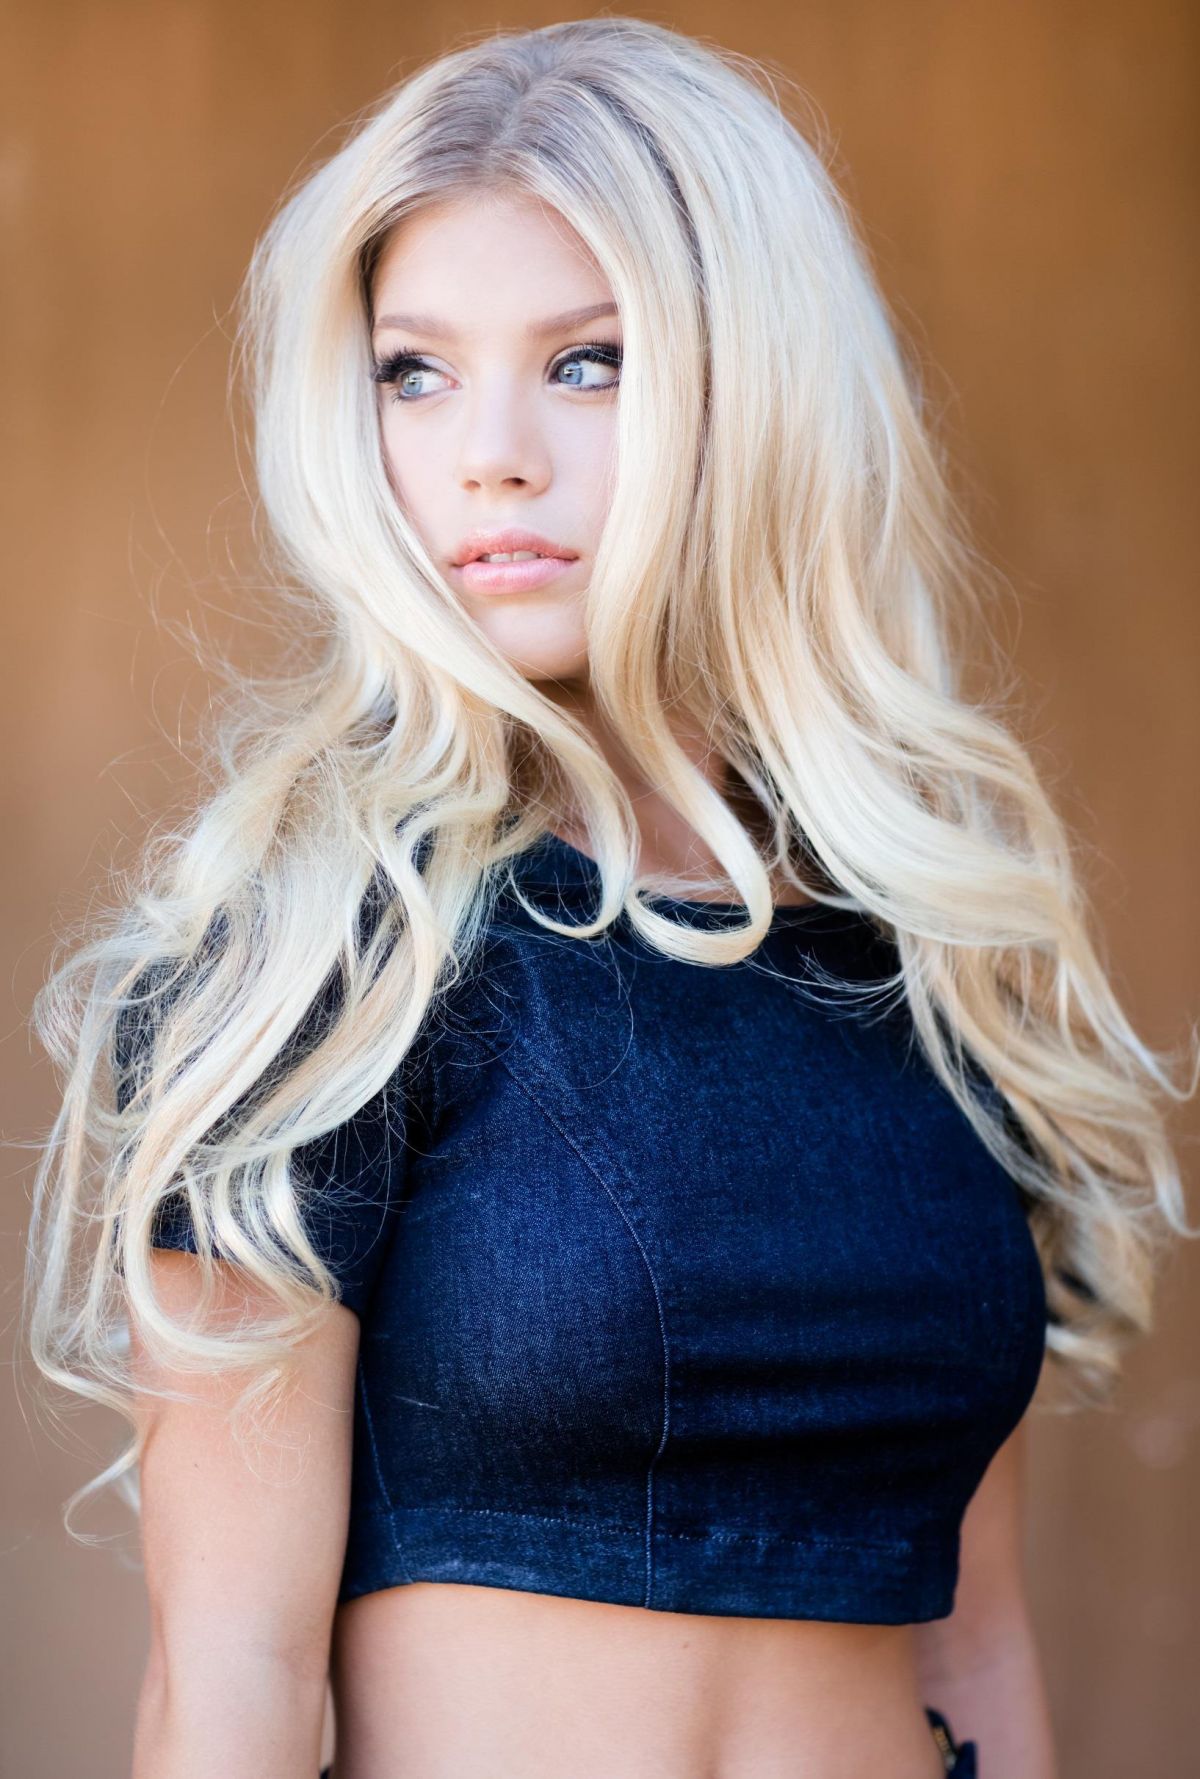 KAYLYN SLEVIN in NationAlist Magazine, October 2015 Issue. 